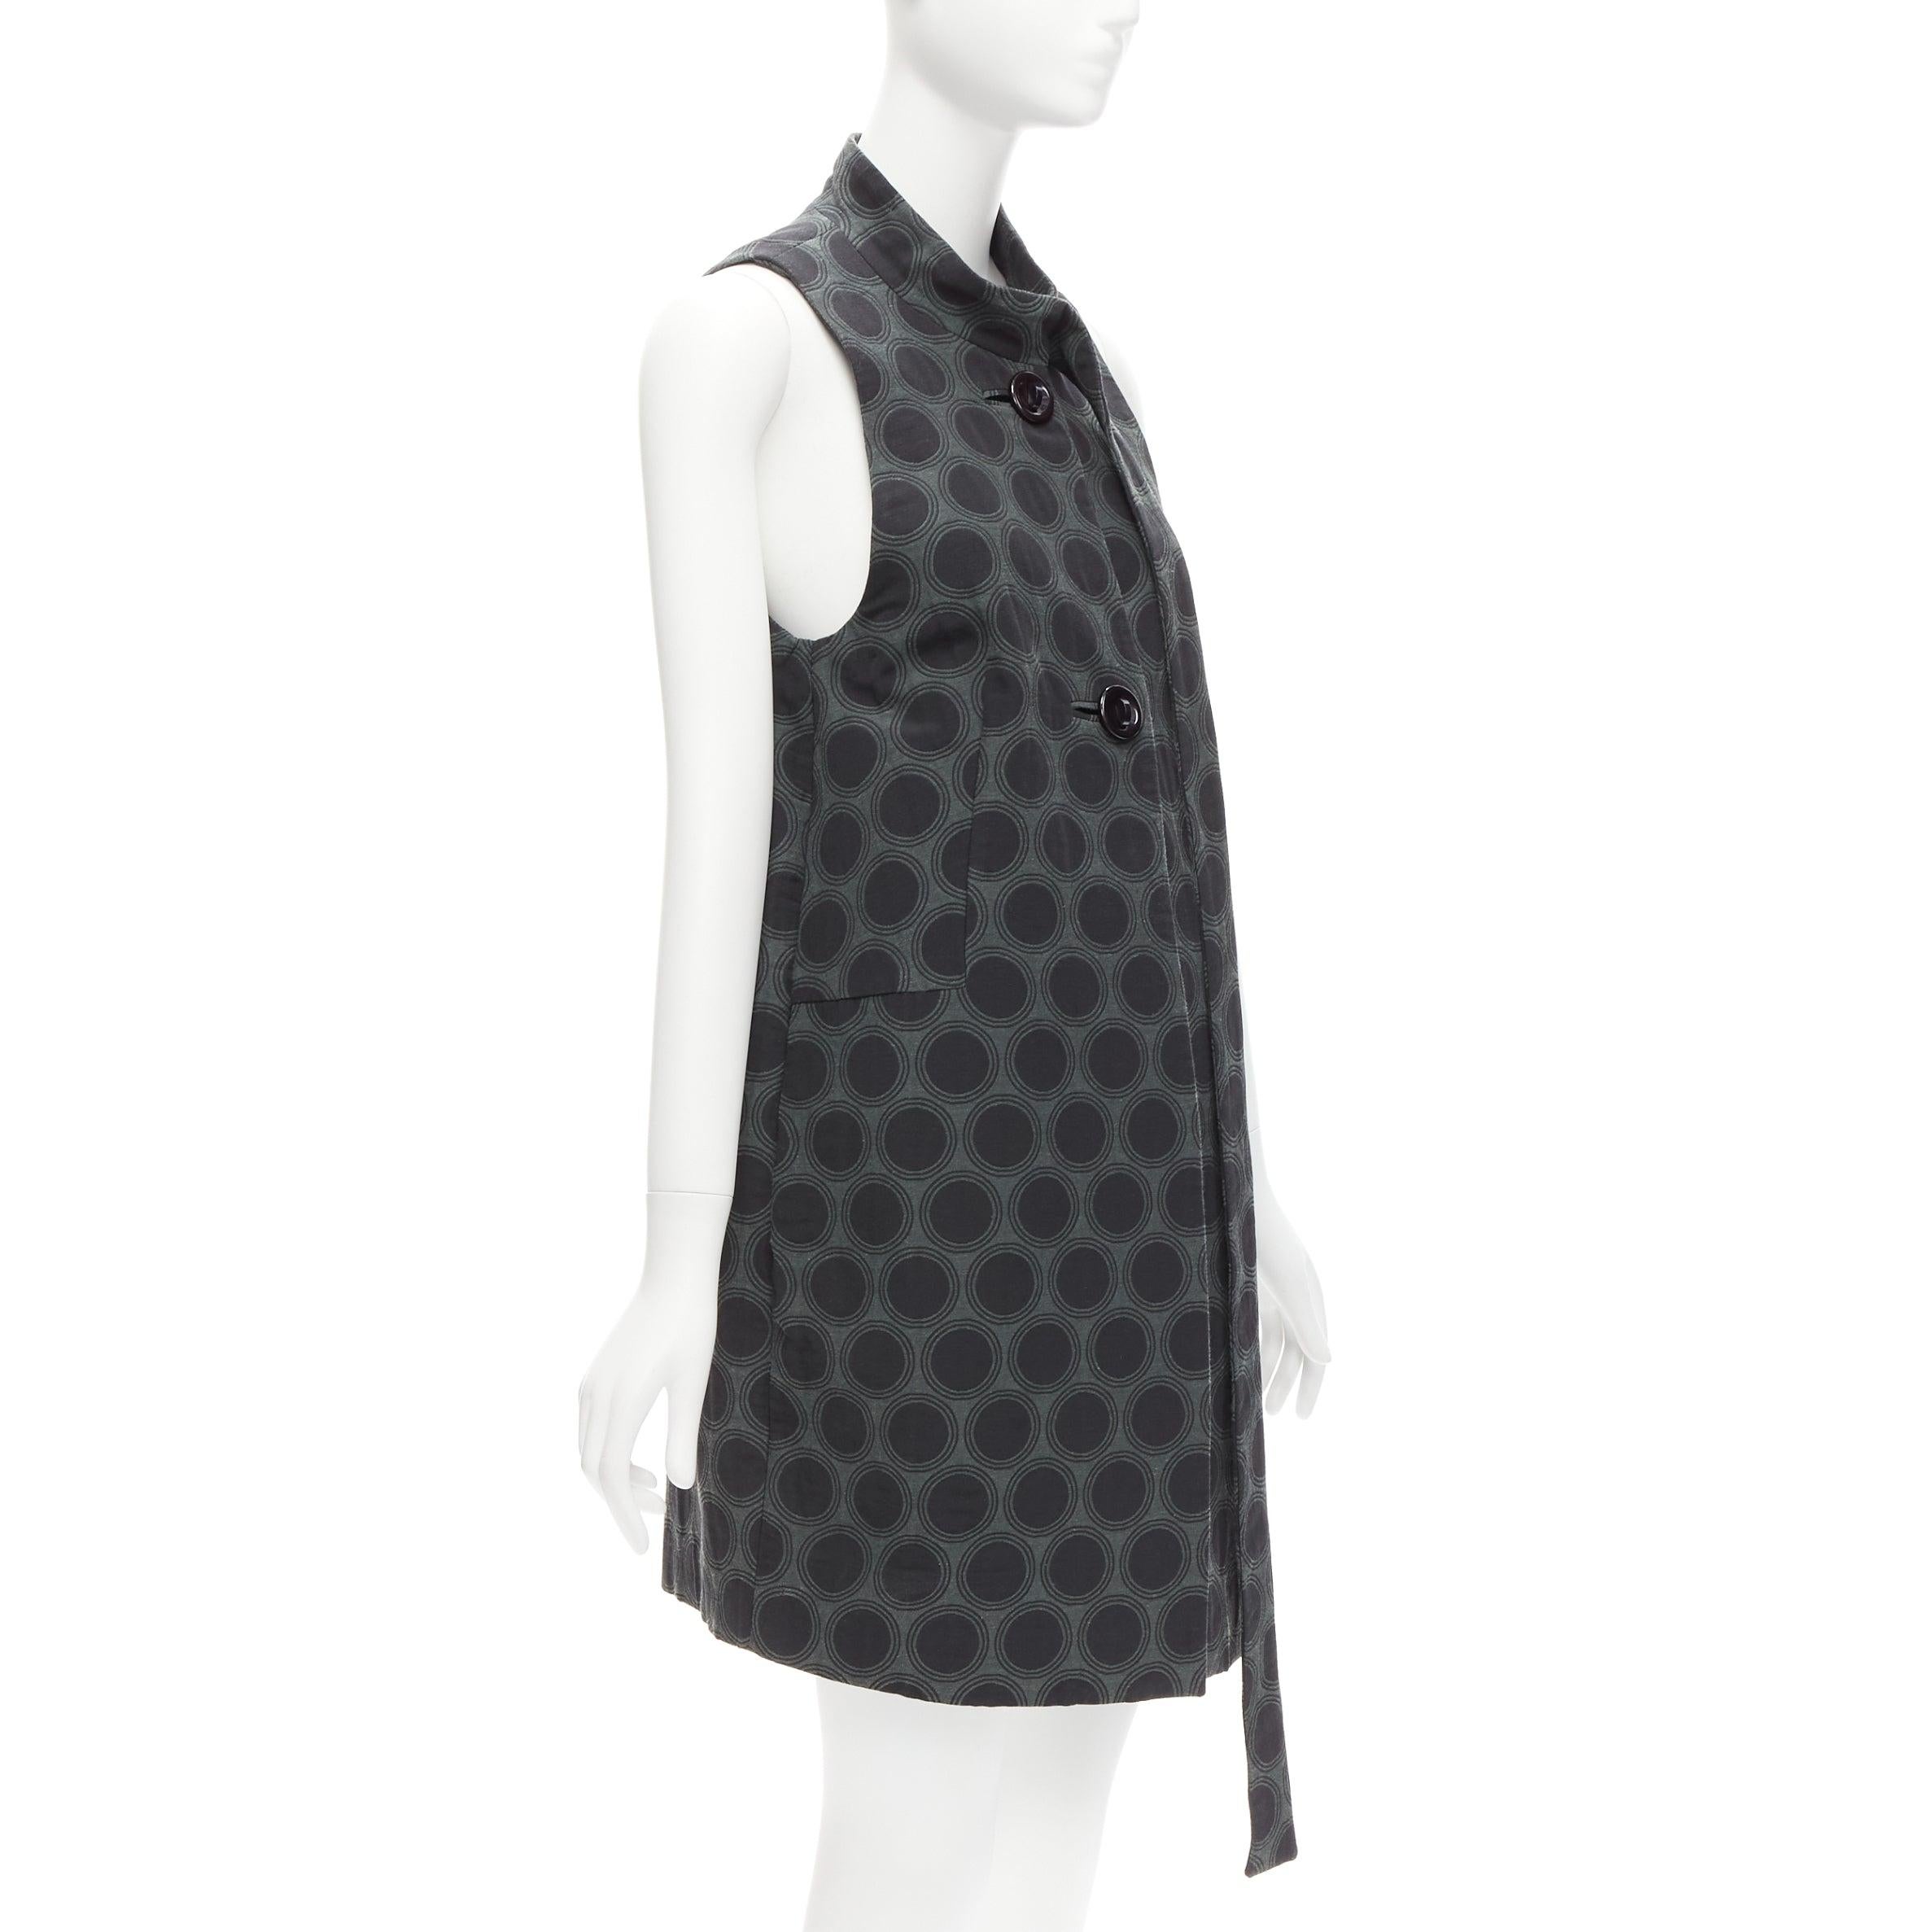 MARNI 2012 navy green black dot print long strap collar dress IT40 S
Reference: CELG/A00233
Brand: Marni
Material: Cotton, Blend
Color: Green, Black
Pattern: Dotted
Closure: Button
Lining: Multicolour Fabric
Extra Details: Extra long belt detail at